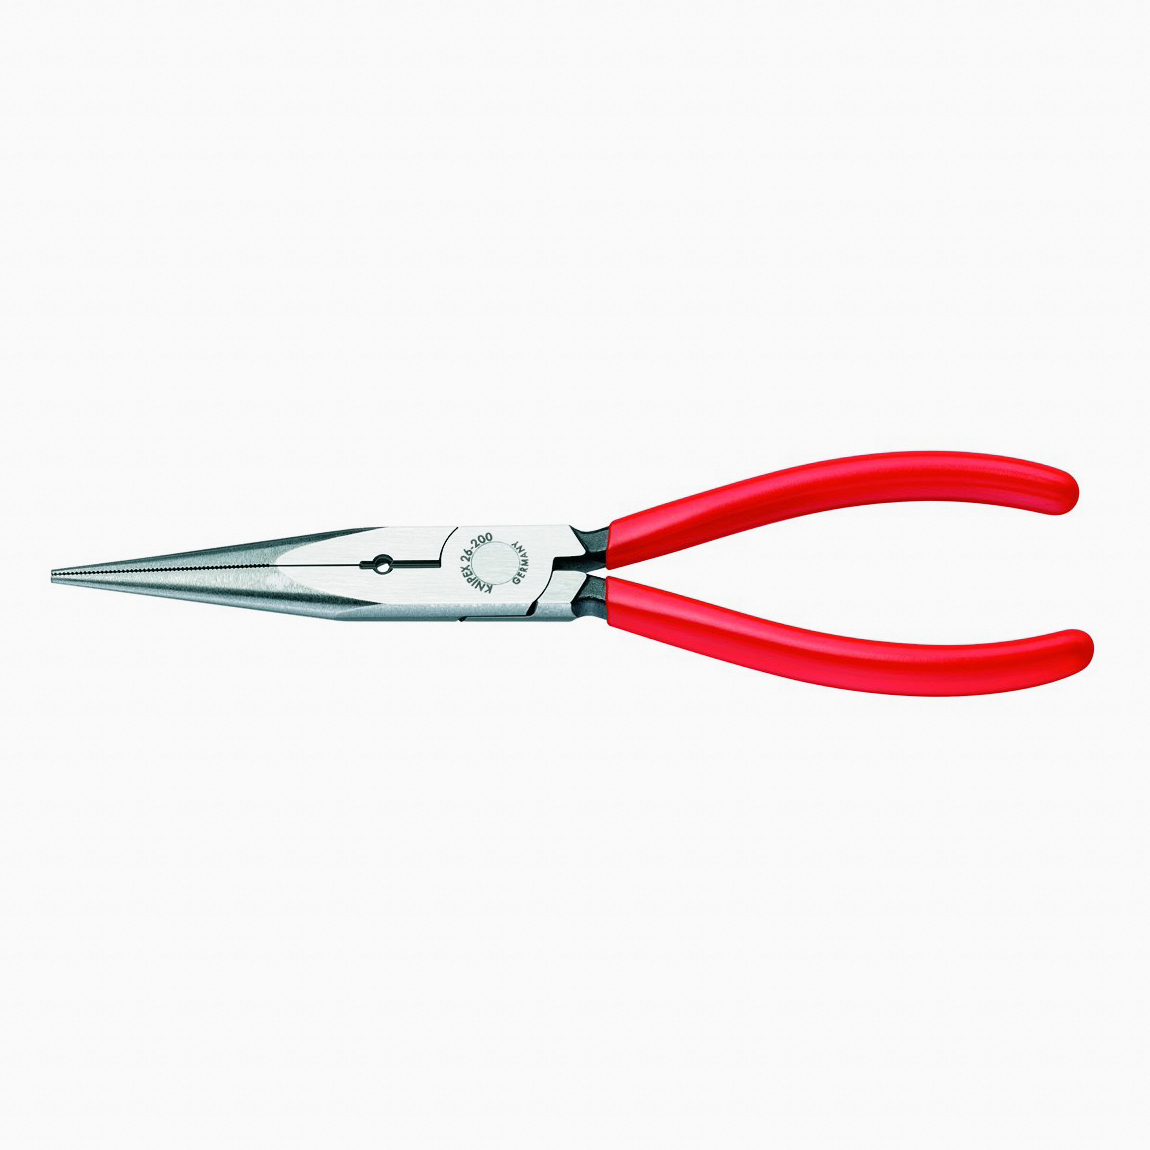 Knipex 26-11-200-S1 8" Snipe Nose Side Cutting Pliers (Stork Beak Pliers) w/ 12 AWG Hole - Plastic Grip - KC Tool